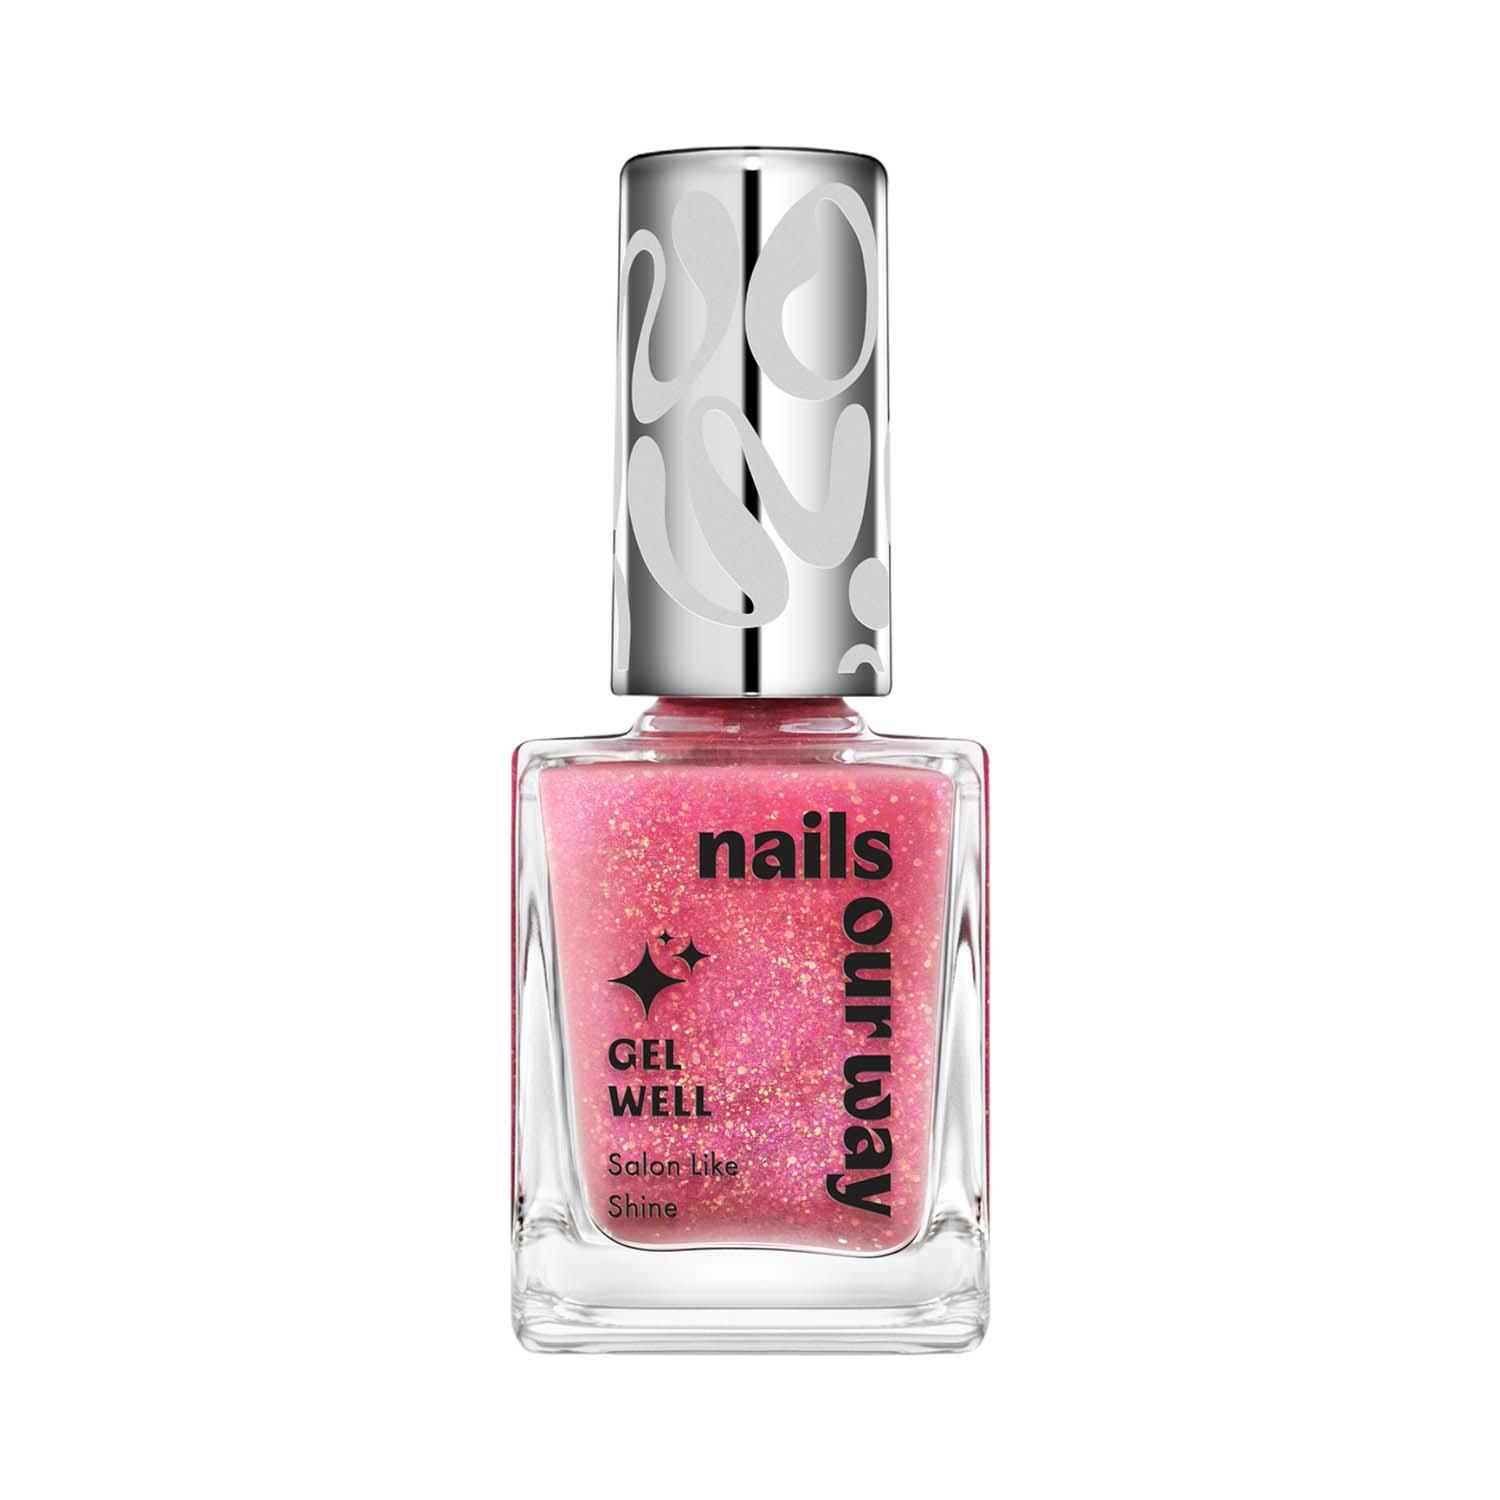 Nails Our Way | Nails Our Way Gel Well Nail Enamel - 217 Lovely (10 ml)